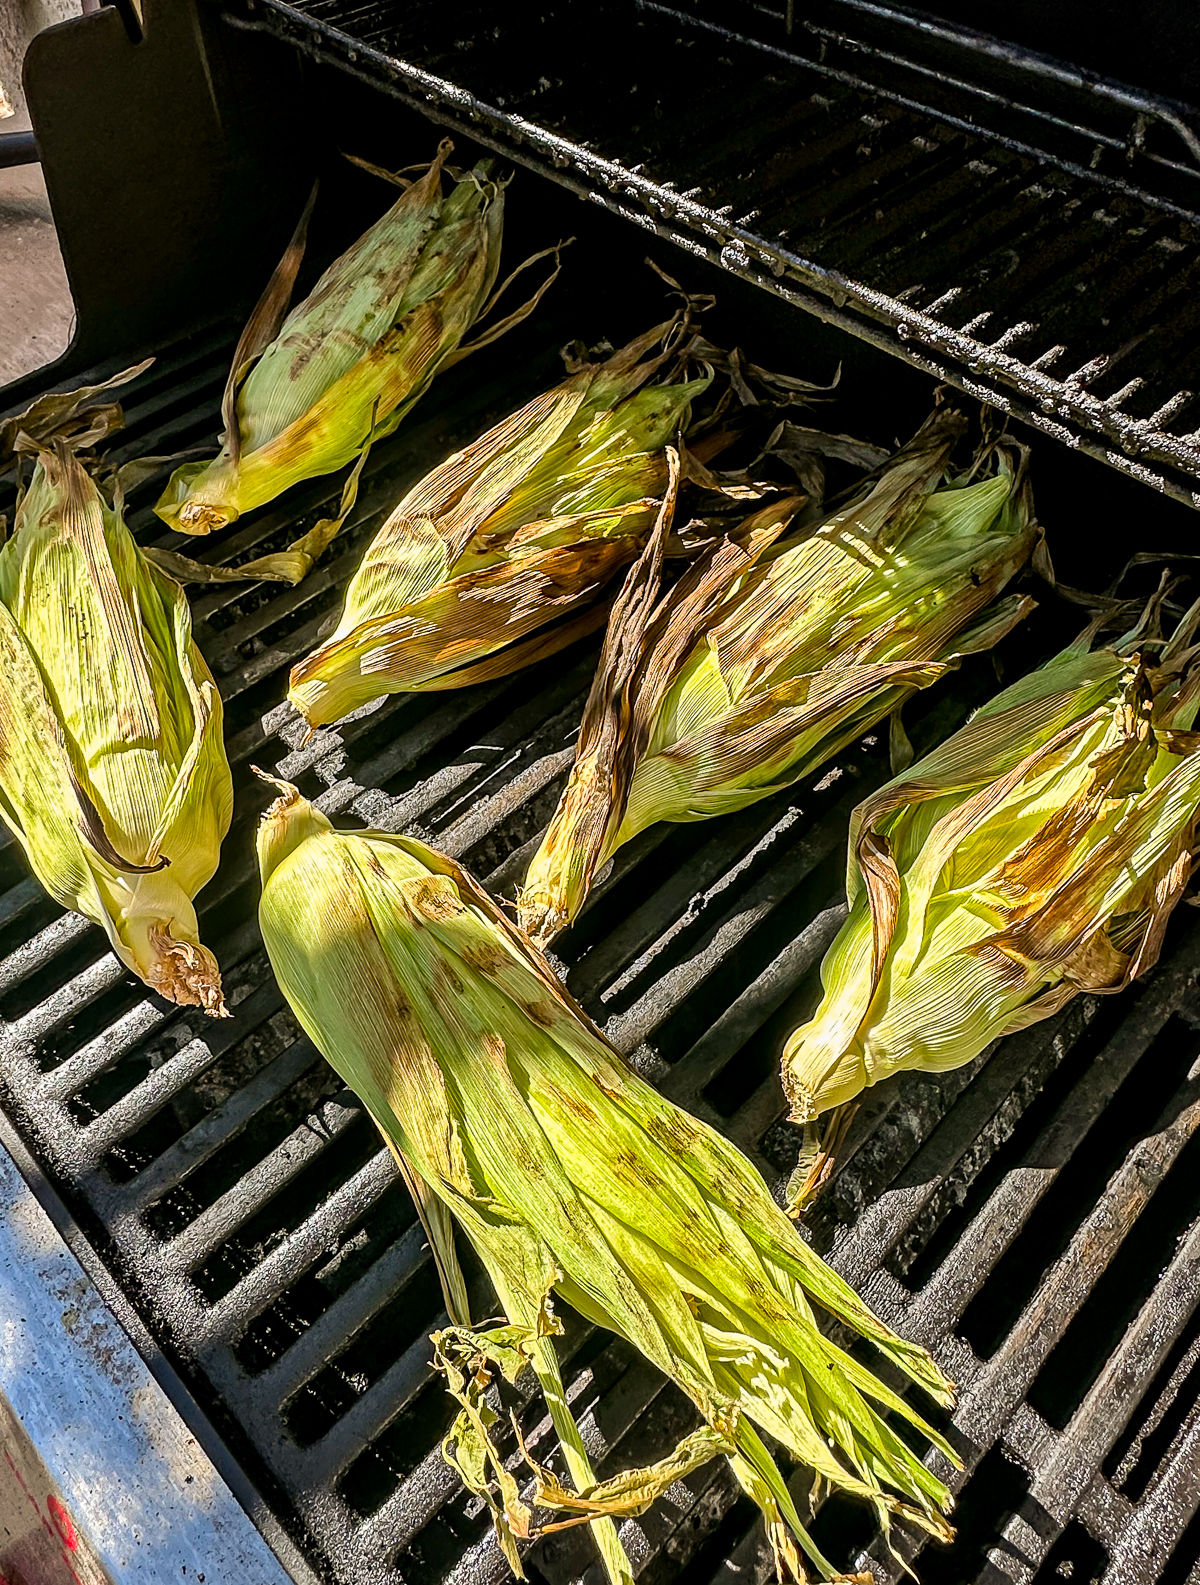 corn in husks on grill